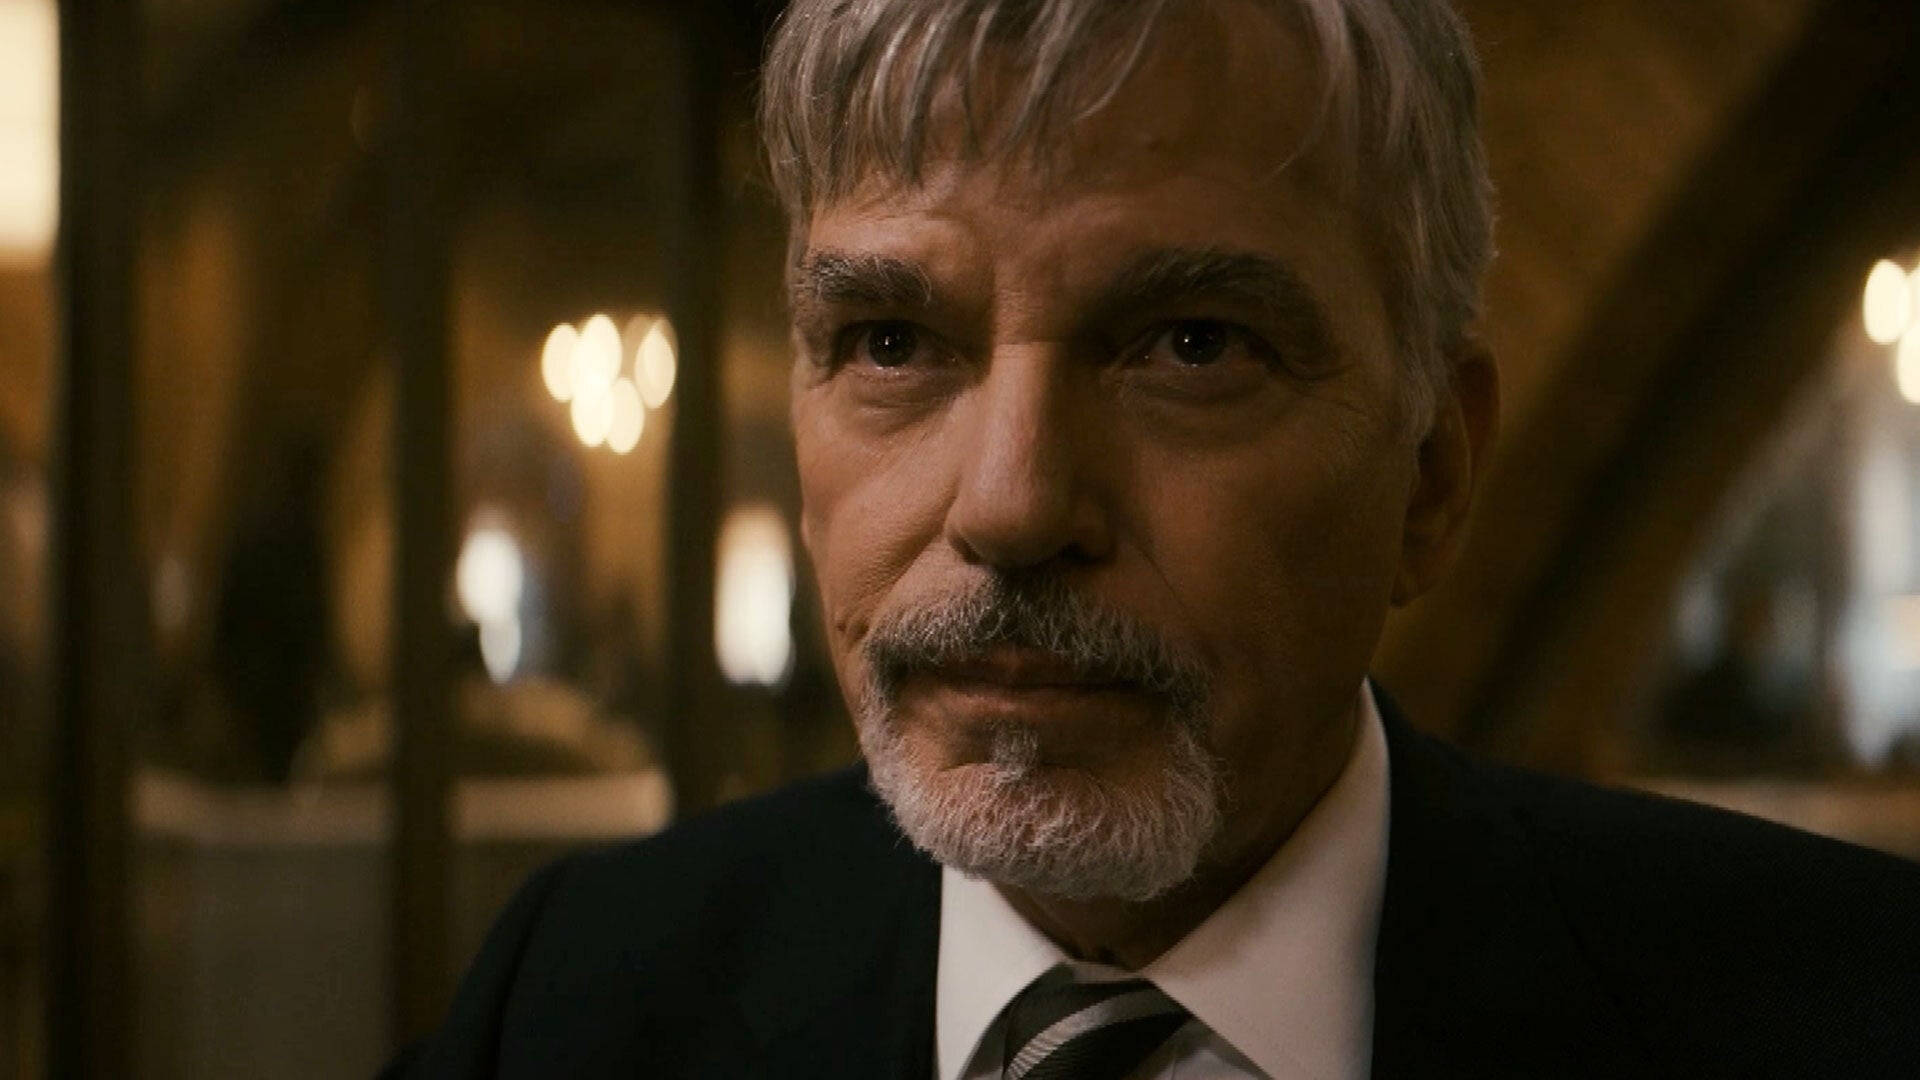 Caption: Prominent Actor Billy Bob Thornton in scene from "Goliath 2016" Wallpaper